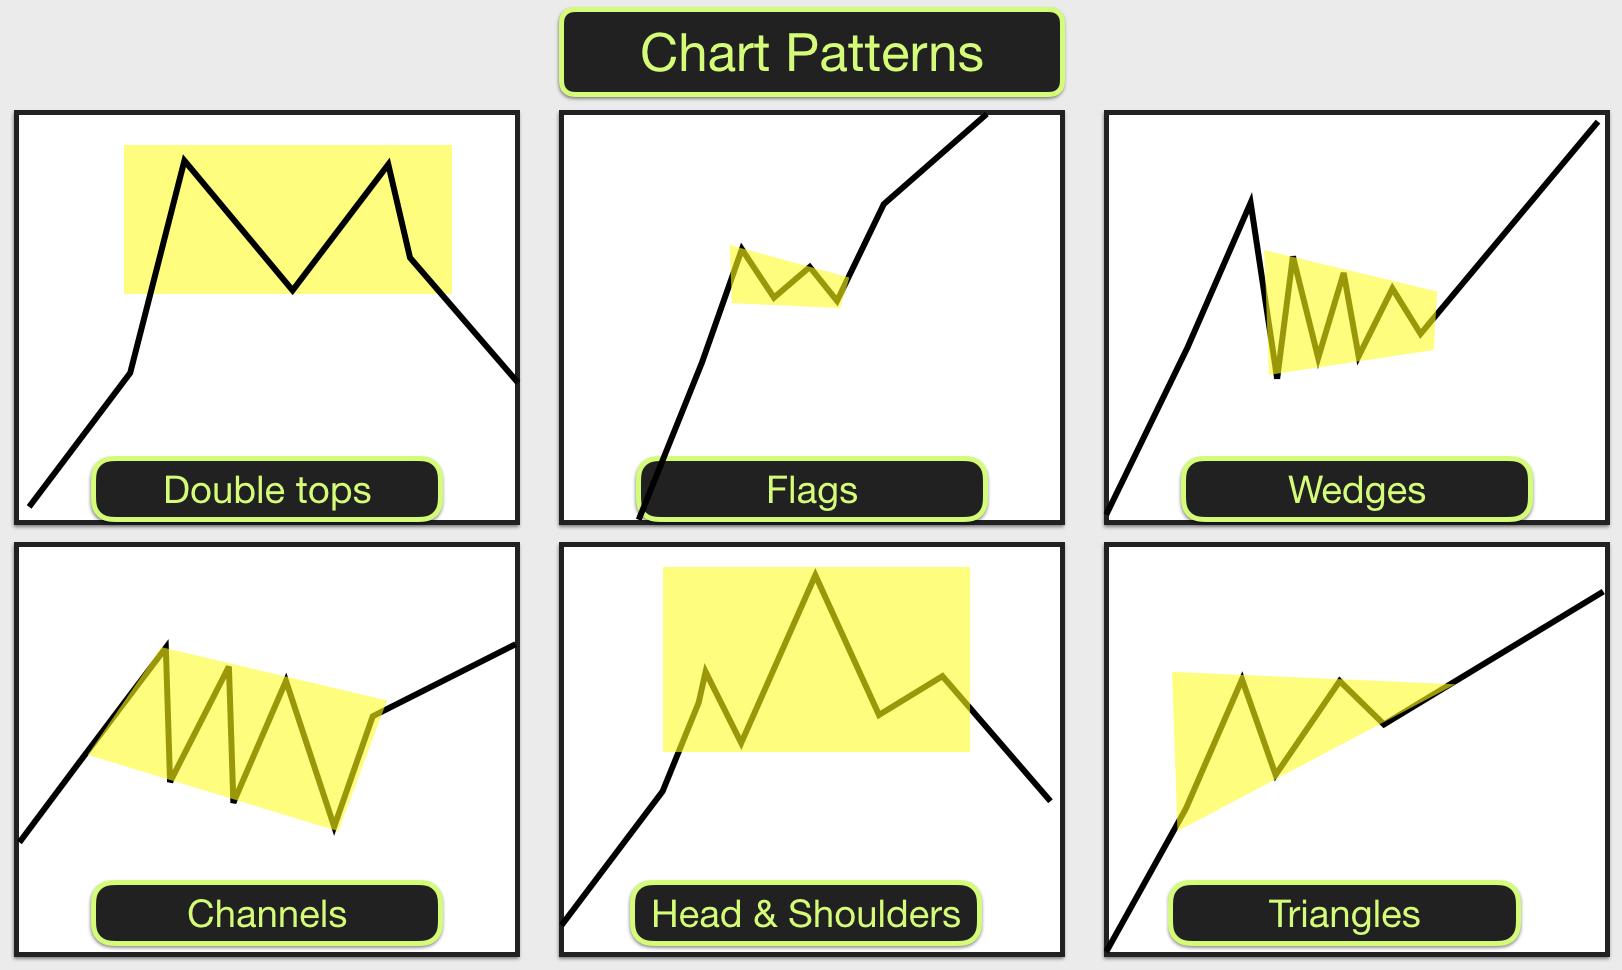 How to trade chart patterns